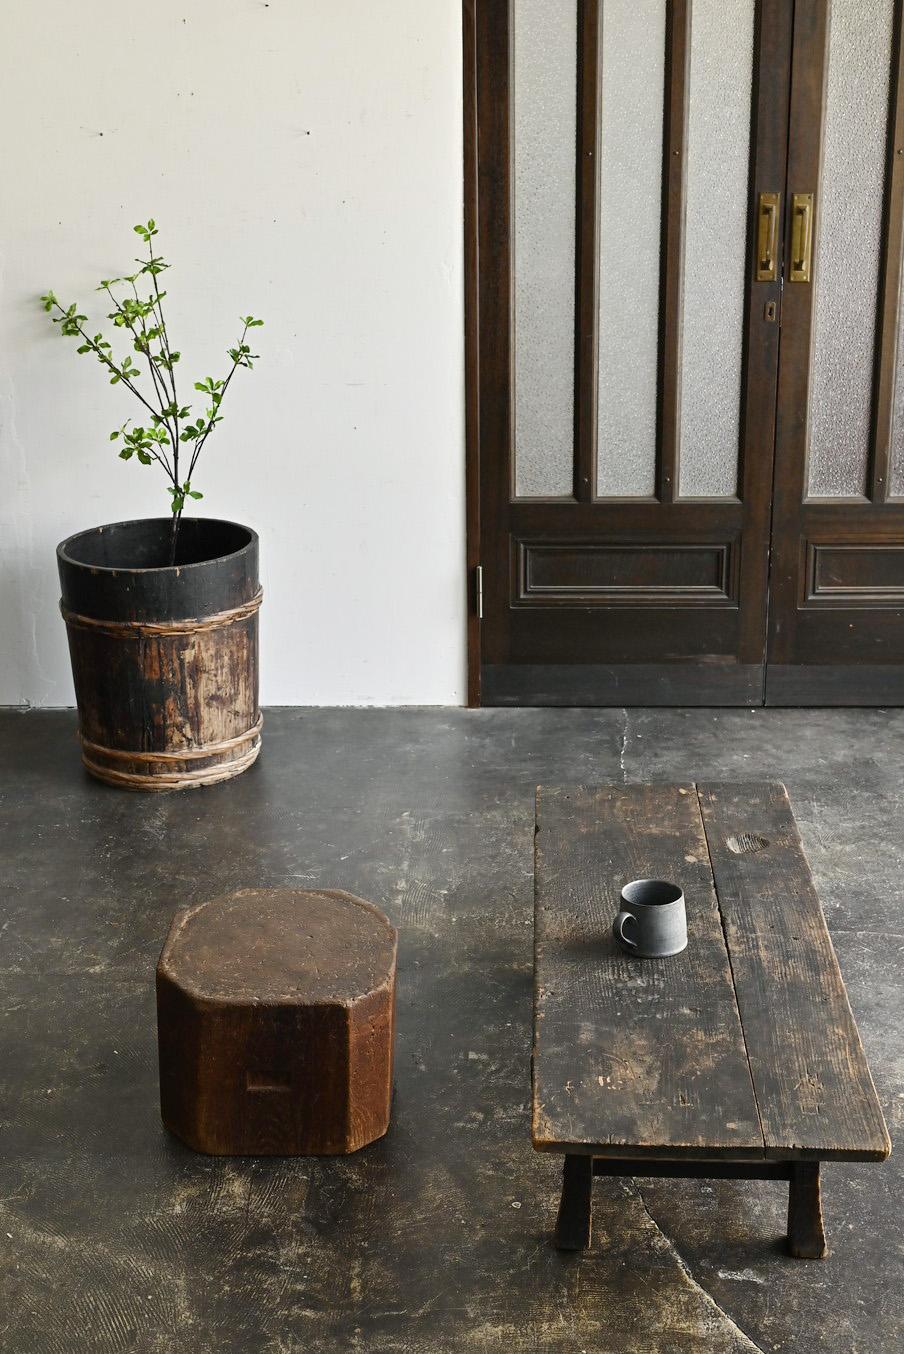 This is a rare Japanese antique wood black low table made in the late Edo to Meiji period.
All materials are cedar wood. Cedar is a tree that has been commonly used for Japanese tools and furniture since ancient times.
The rustic wood grain of the